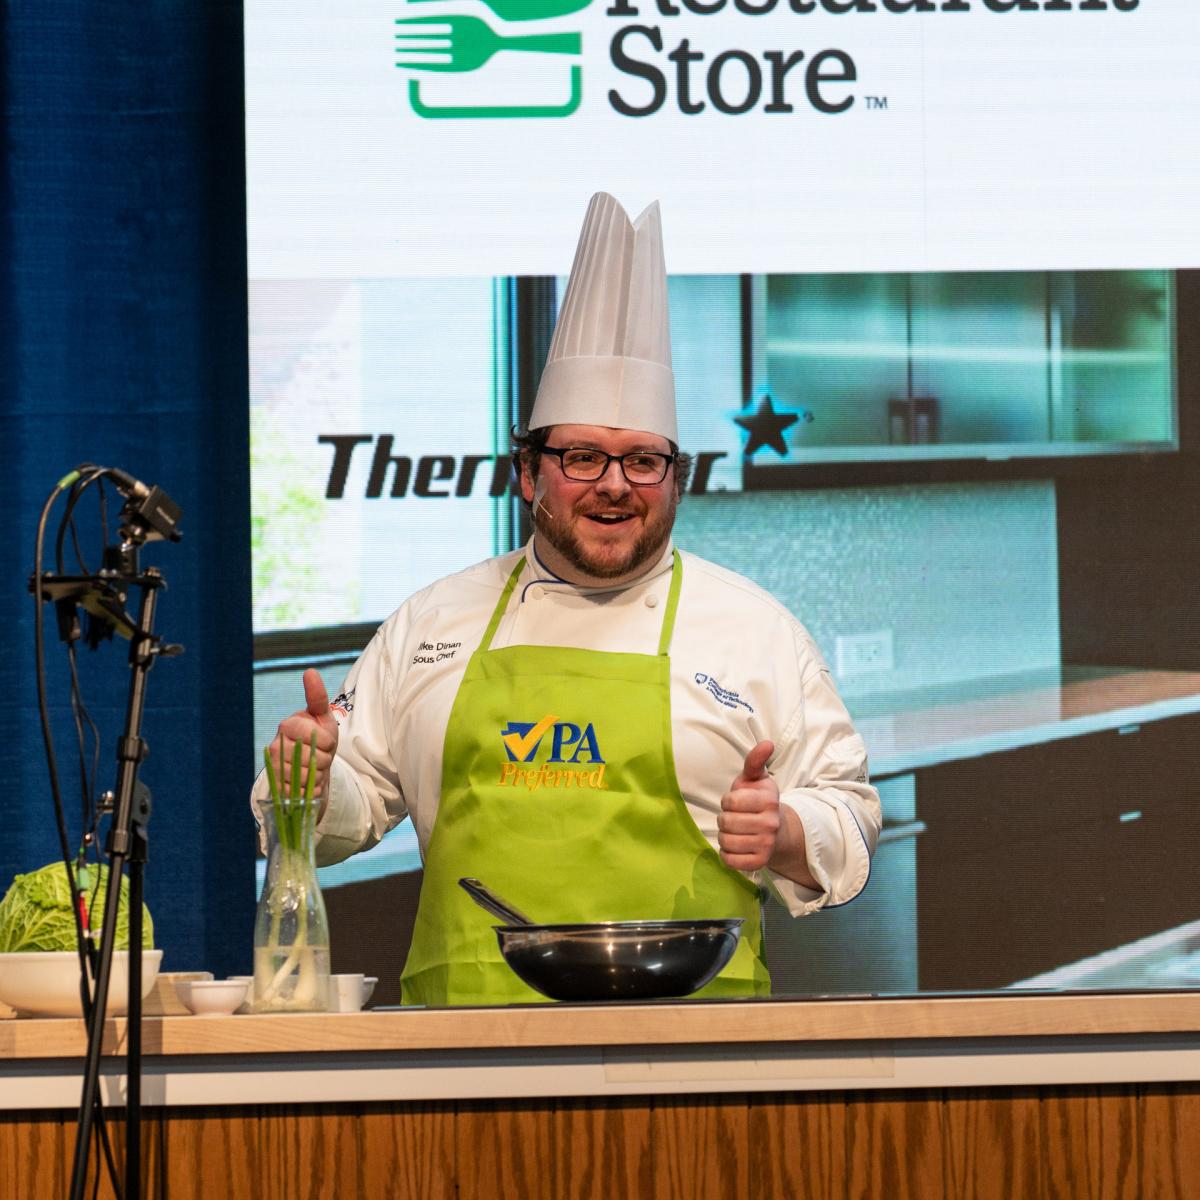 Dinan, executive chef of Le Jeune Chef Restaurant, where Penn College hospitality students practice their craft, engages the crowd as he demonstrates Korean sticky chicken with cabbage stir fry.